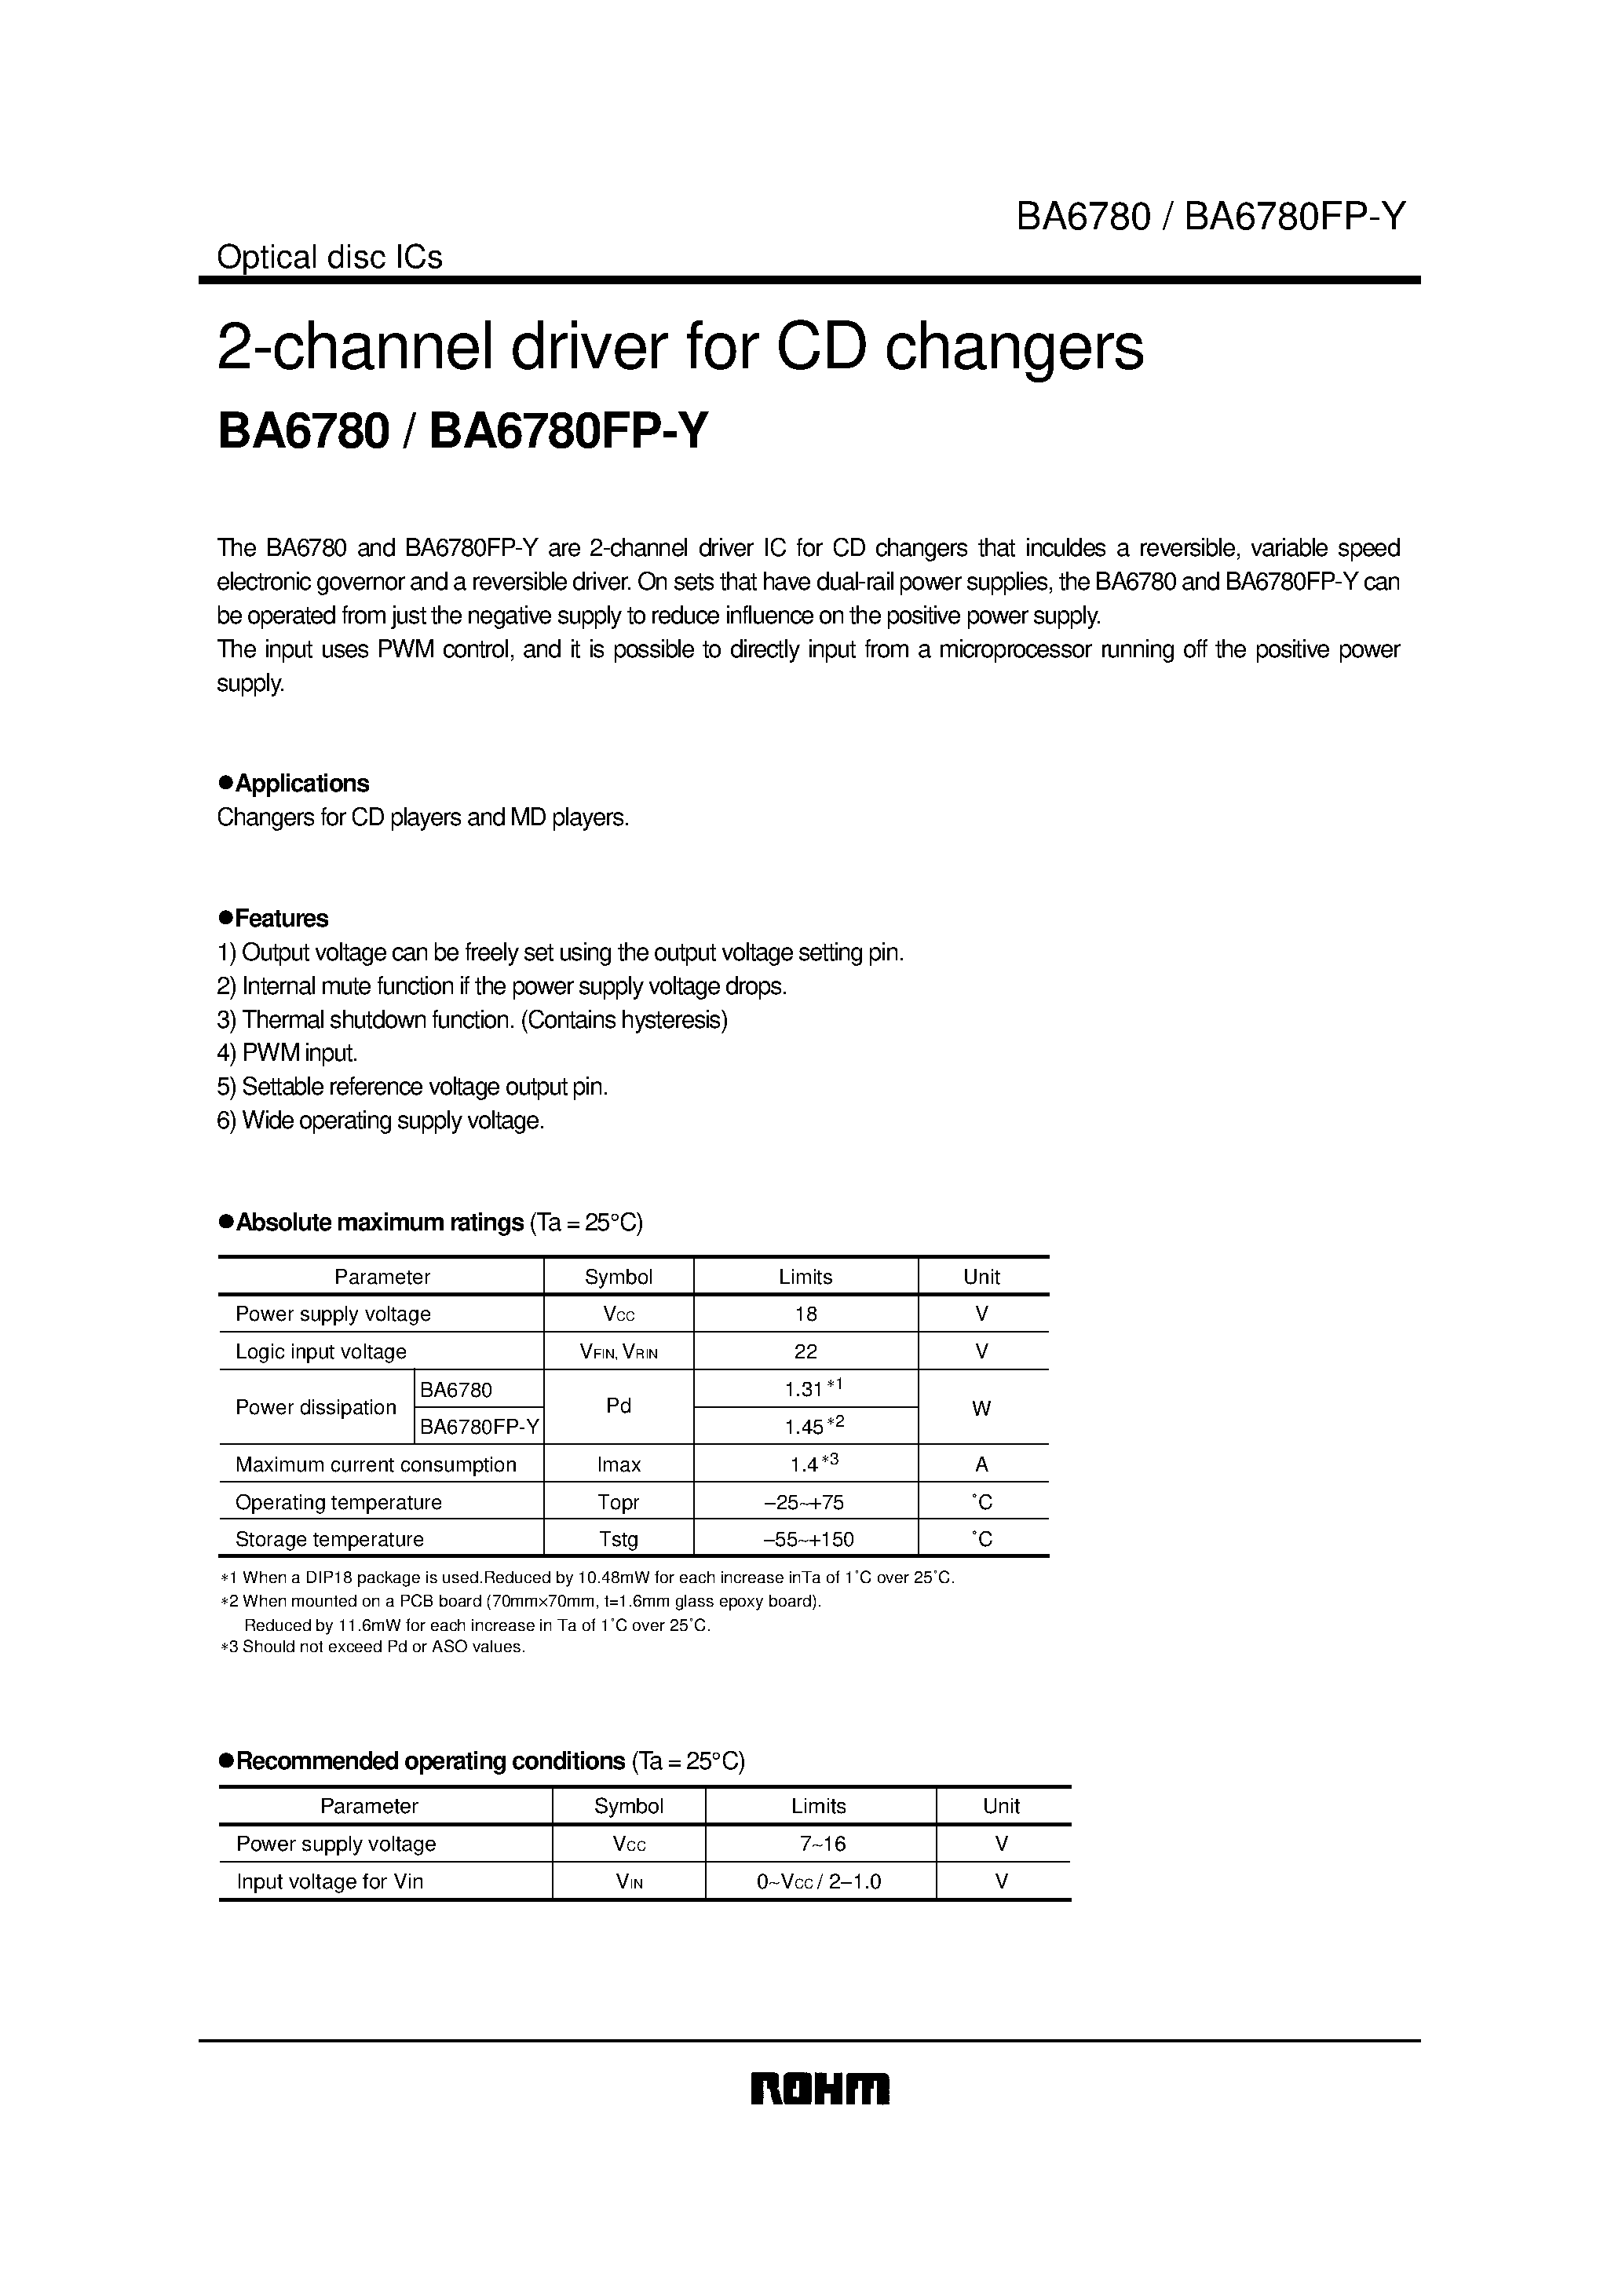 Datasheet BA6780FP-Y - 2-channel driver for CD changers page 1